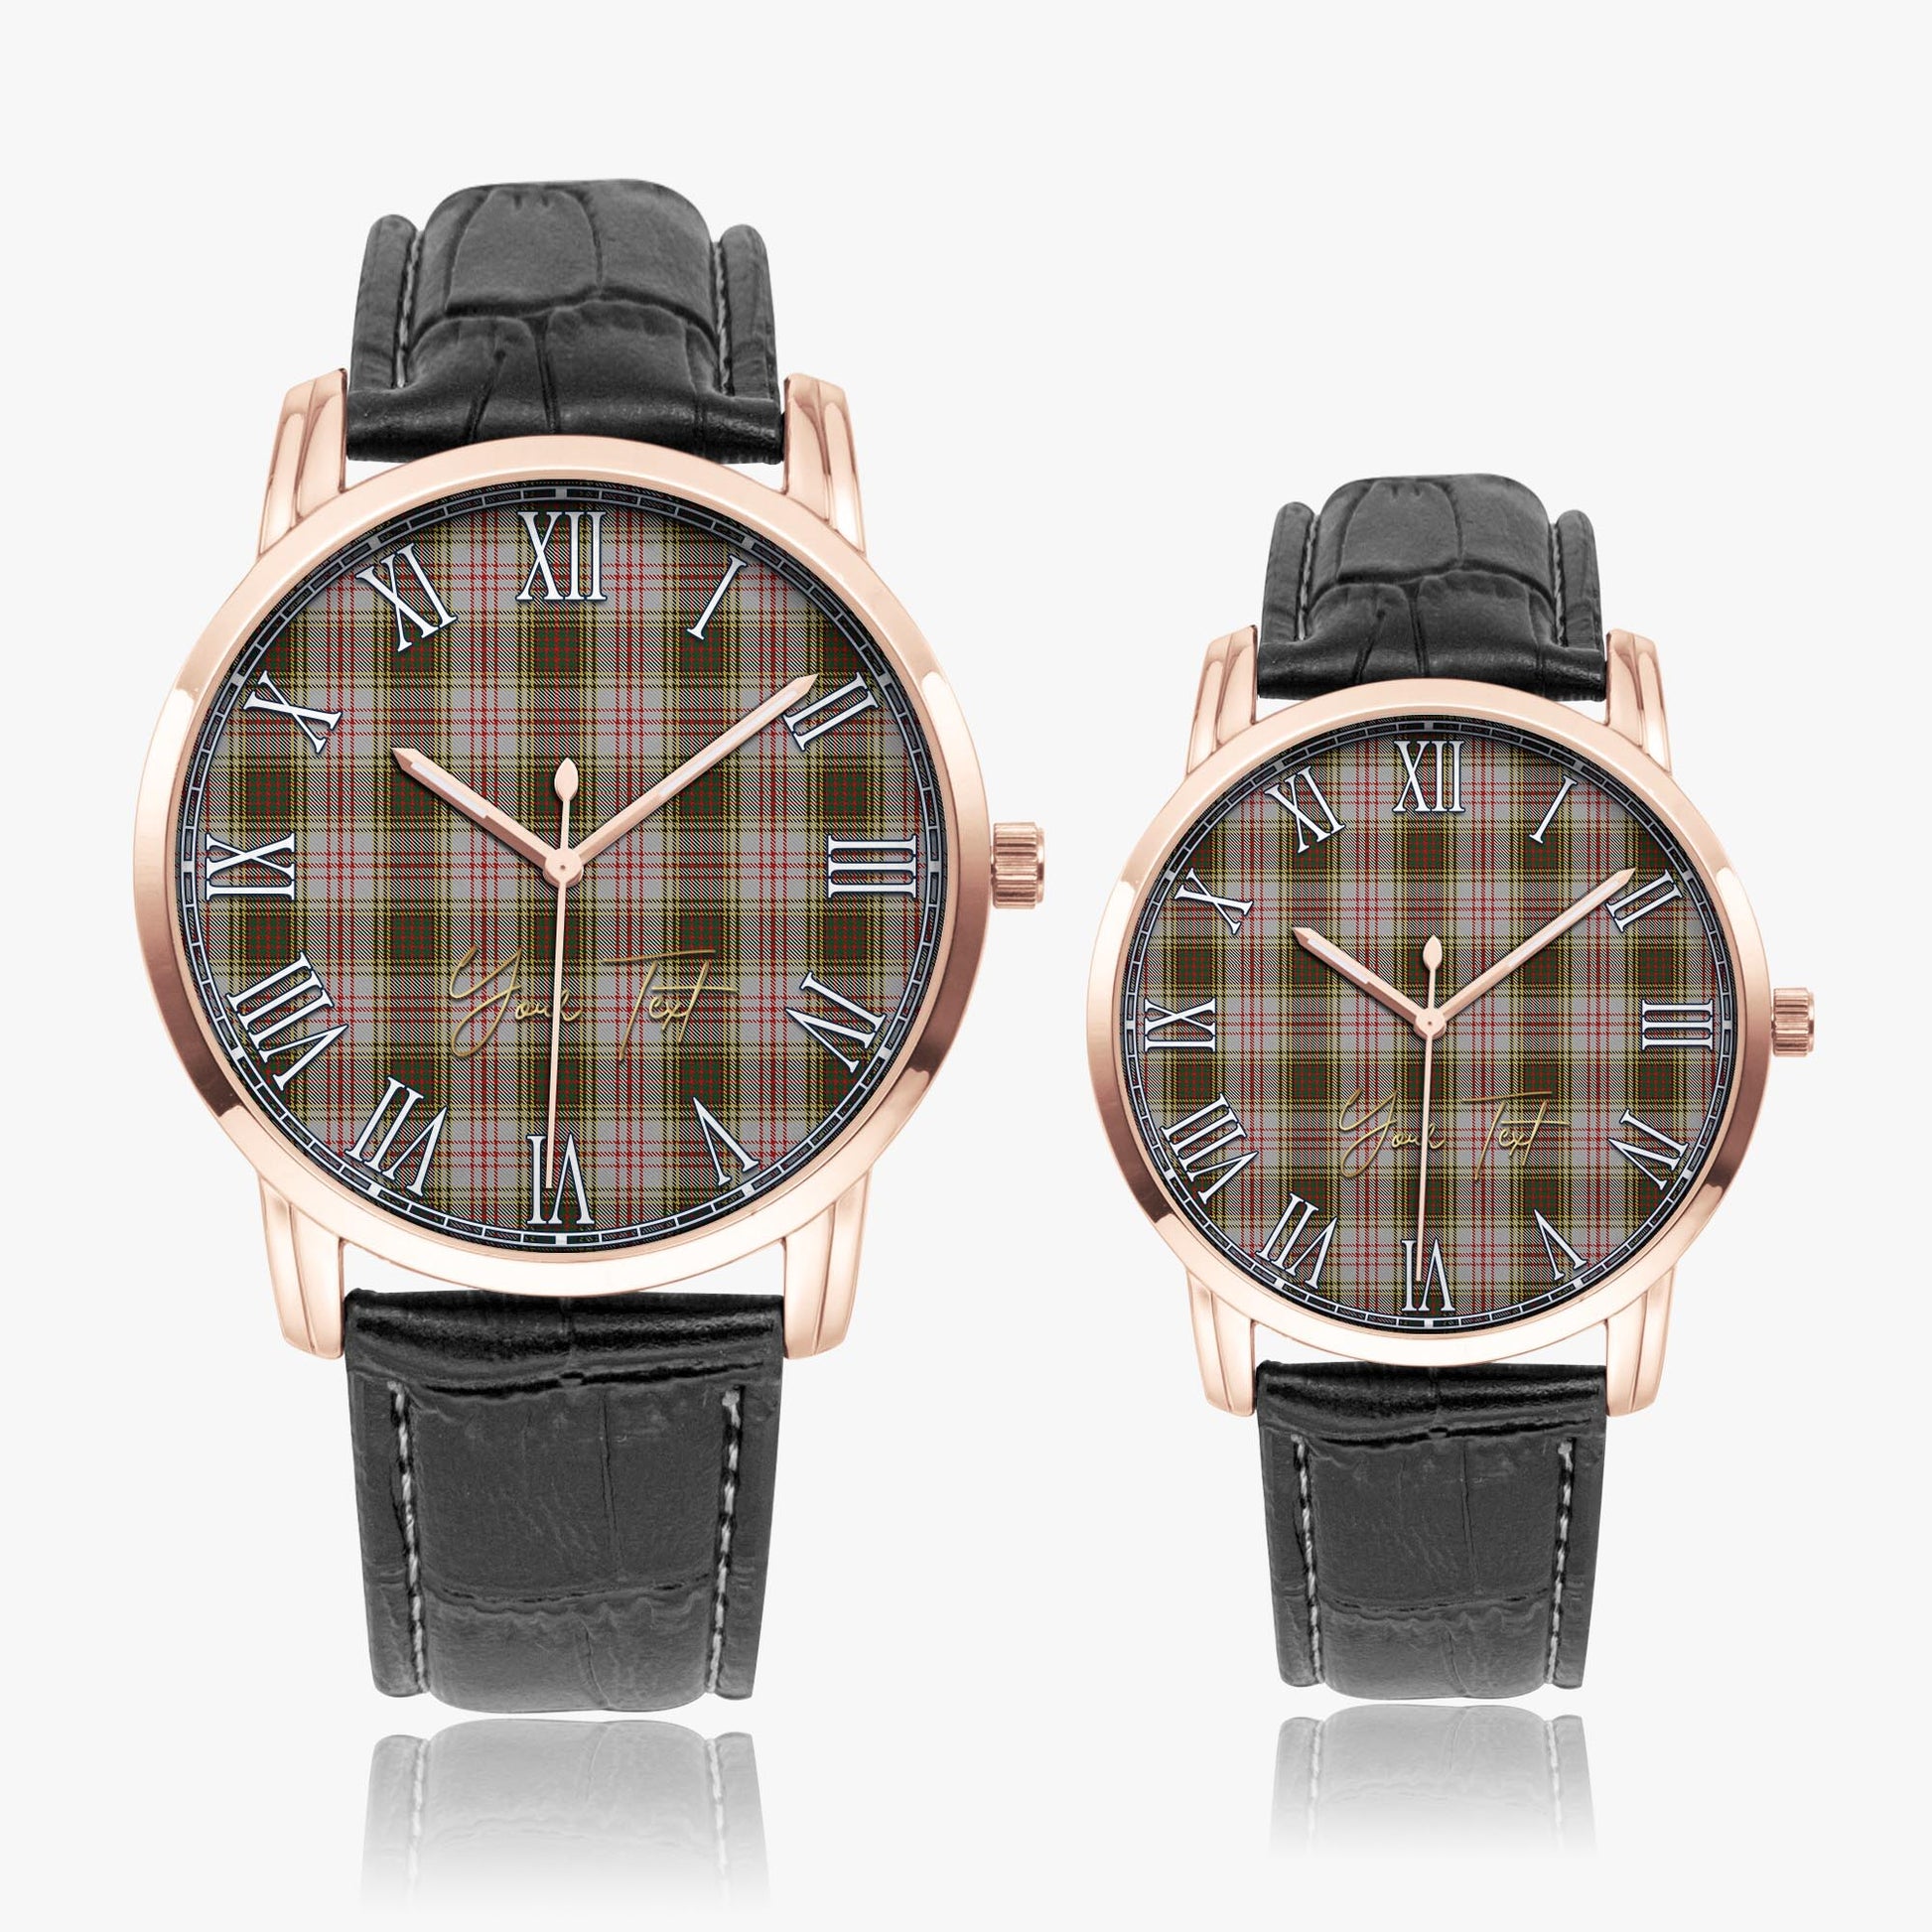 Anderson Dress Tartan Personalized Your Text Leather Trap Quartz Watch Wide Type Rose Gold Case With Black Leather Strap - Tartanvibesclothing